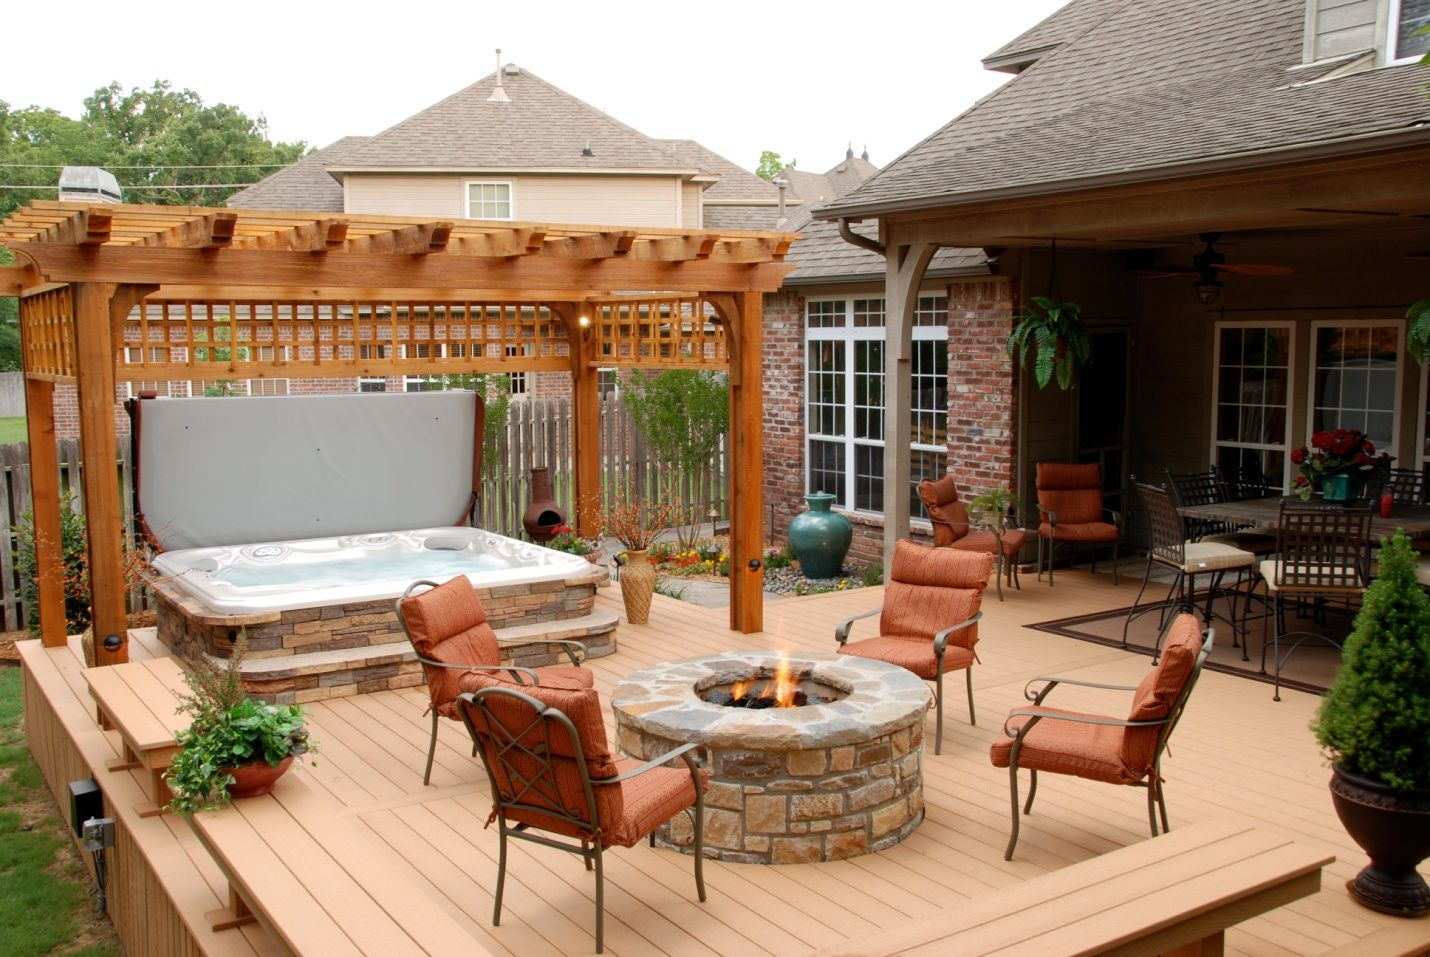 Deck Designs With Hot Tub And Deck Designs With Hot Tub And Fire Pit inside size 1430 X 957